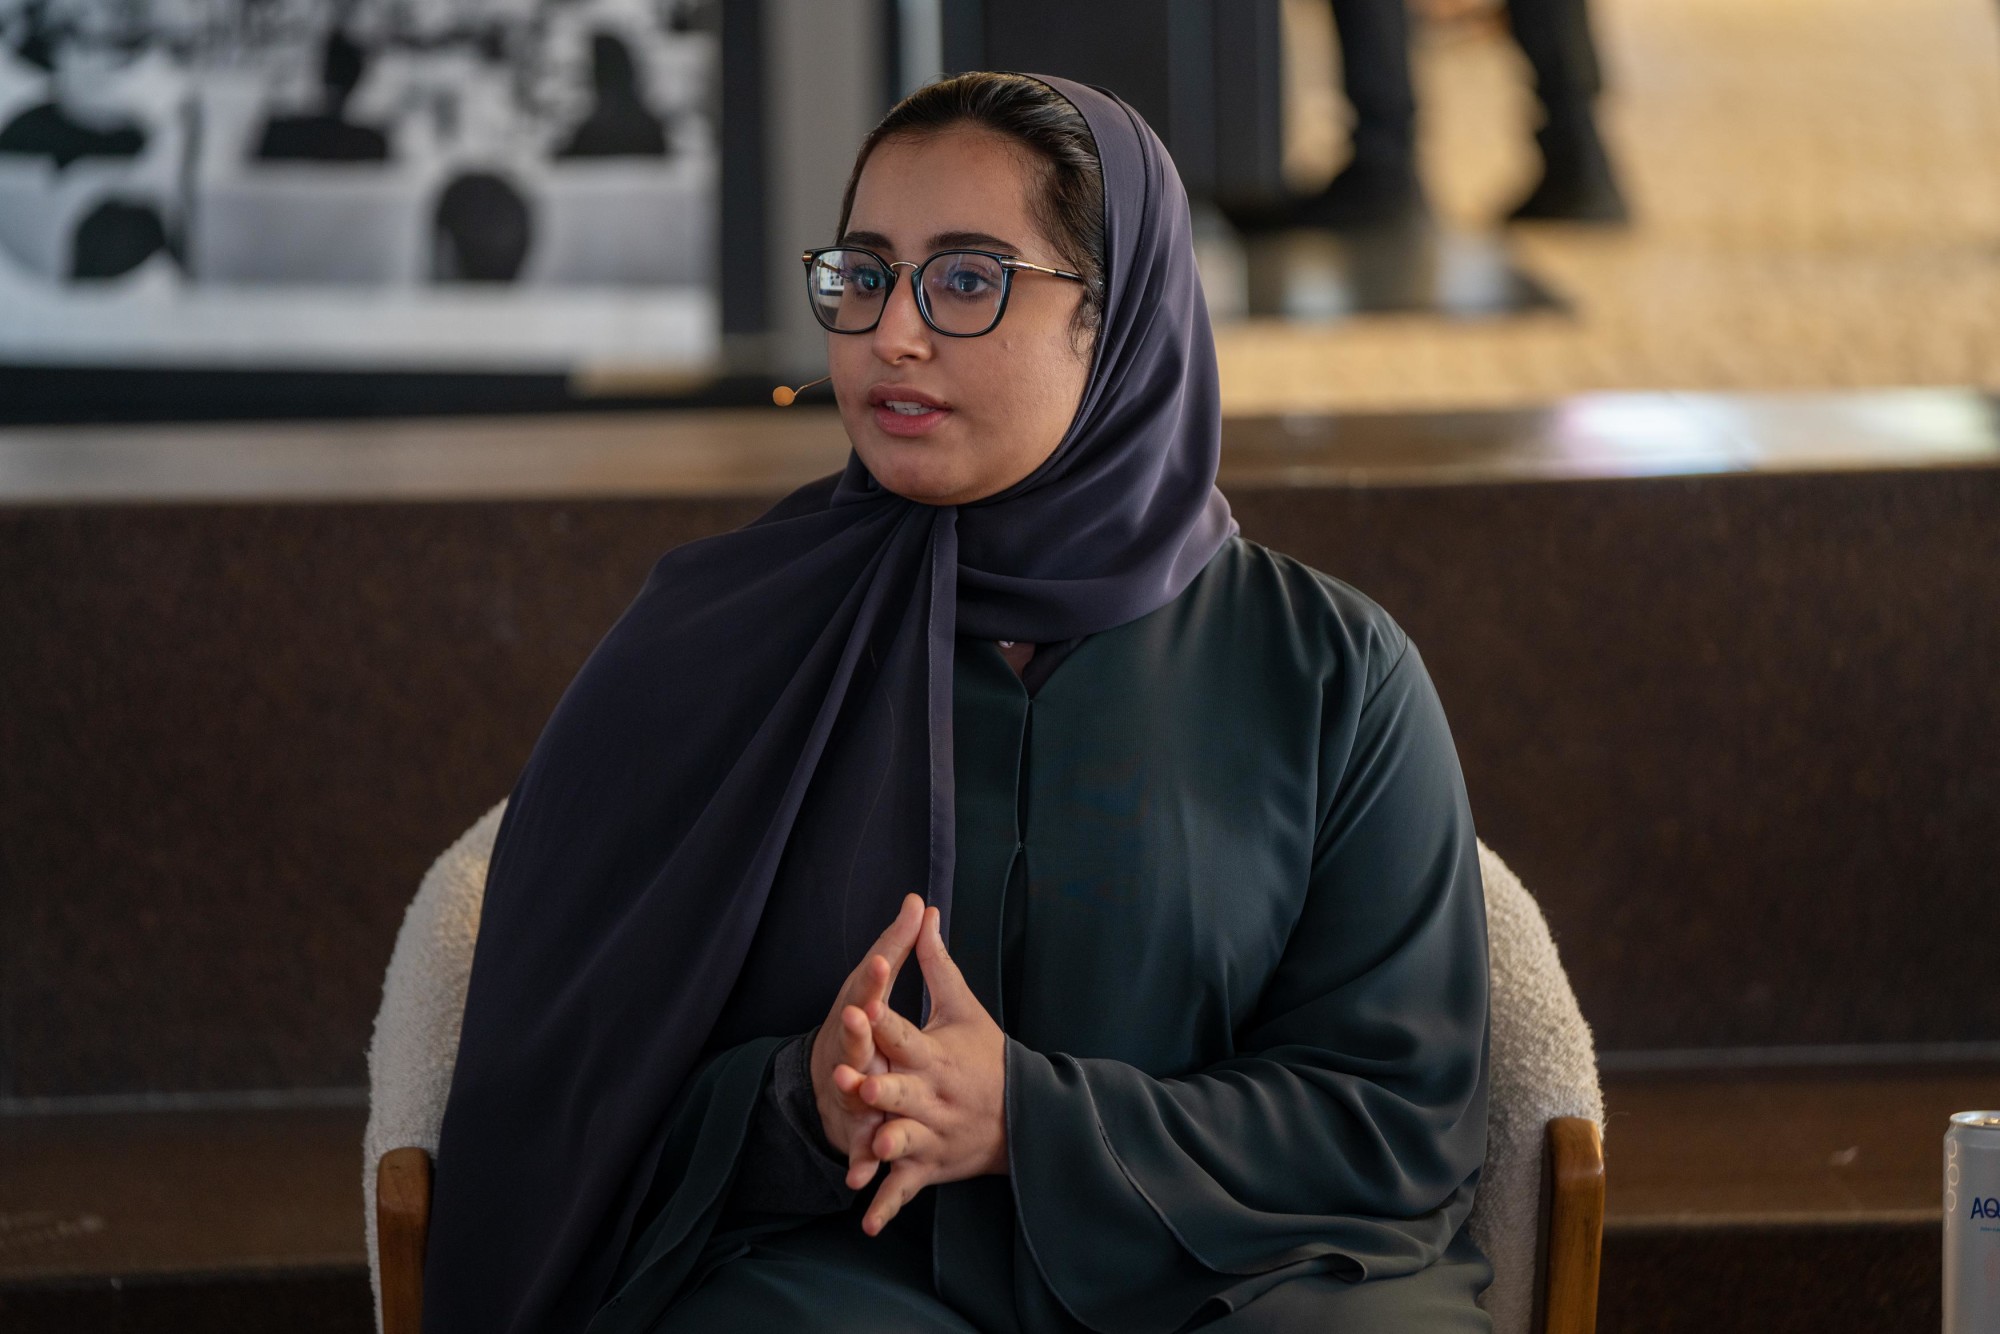 Amna Almansoori, Emirates National School, Ras Al Khaimah speaks during Next Gen World Majlis, A School For My Children Notes from the teachers and parents of tomorrow at the Portugal Pavilion m37177